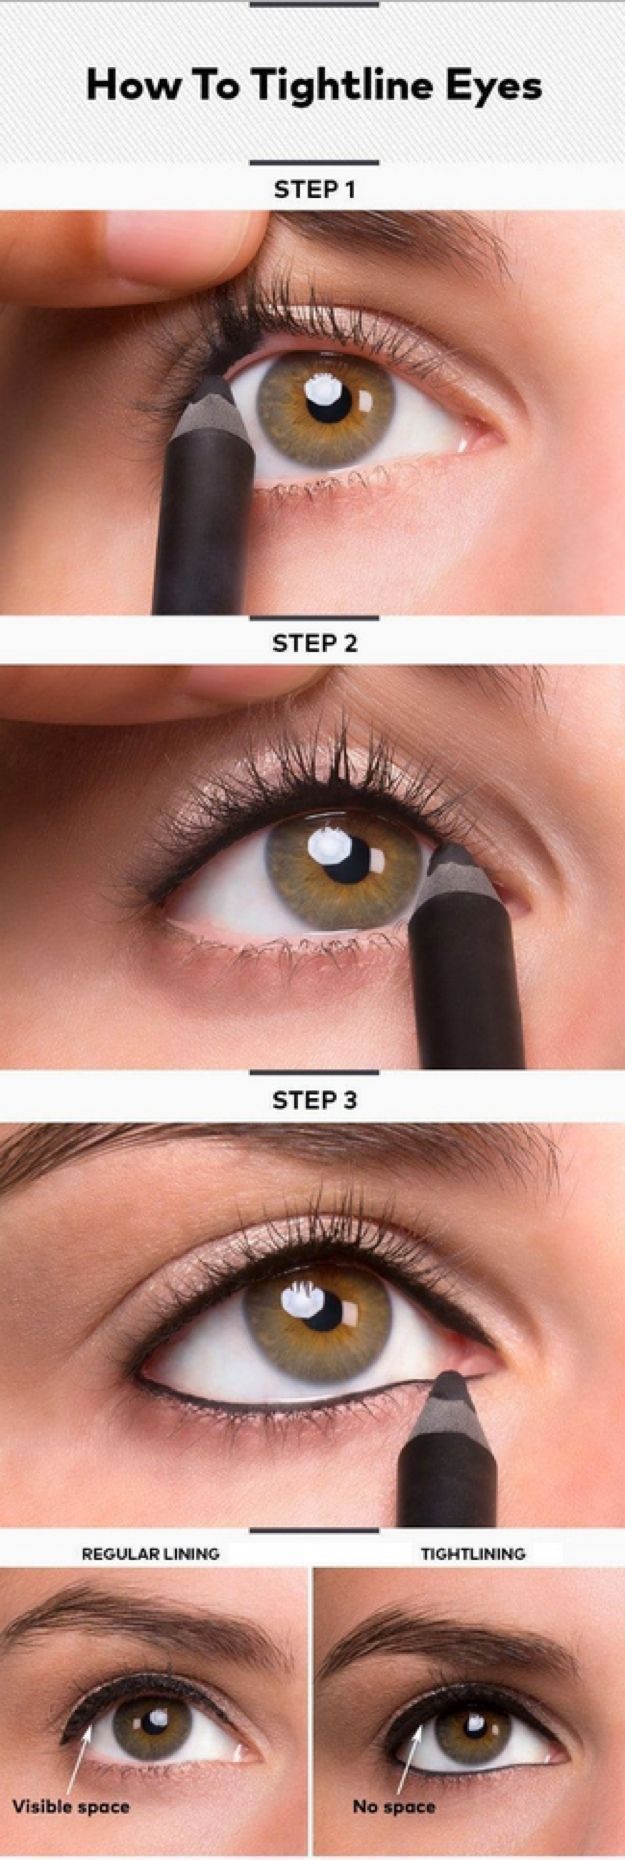 Eyeliner Tips and Tricks for A Perfect Tightline Eyeliner Look by Makeup Tutoria...